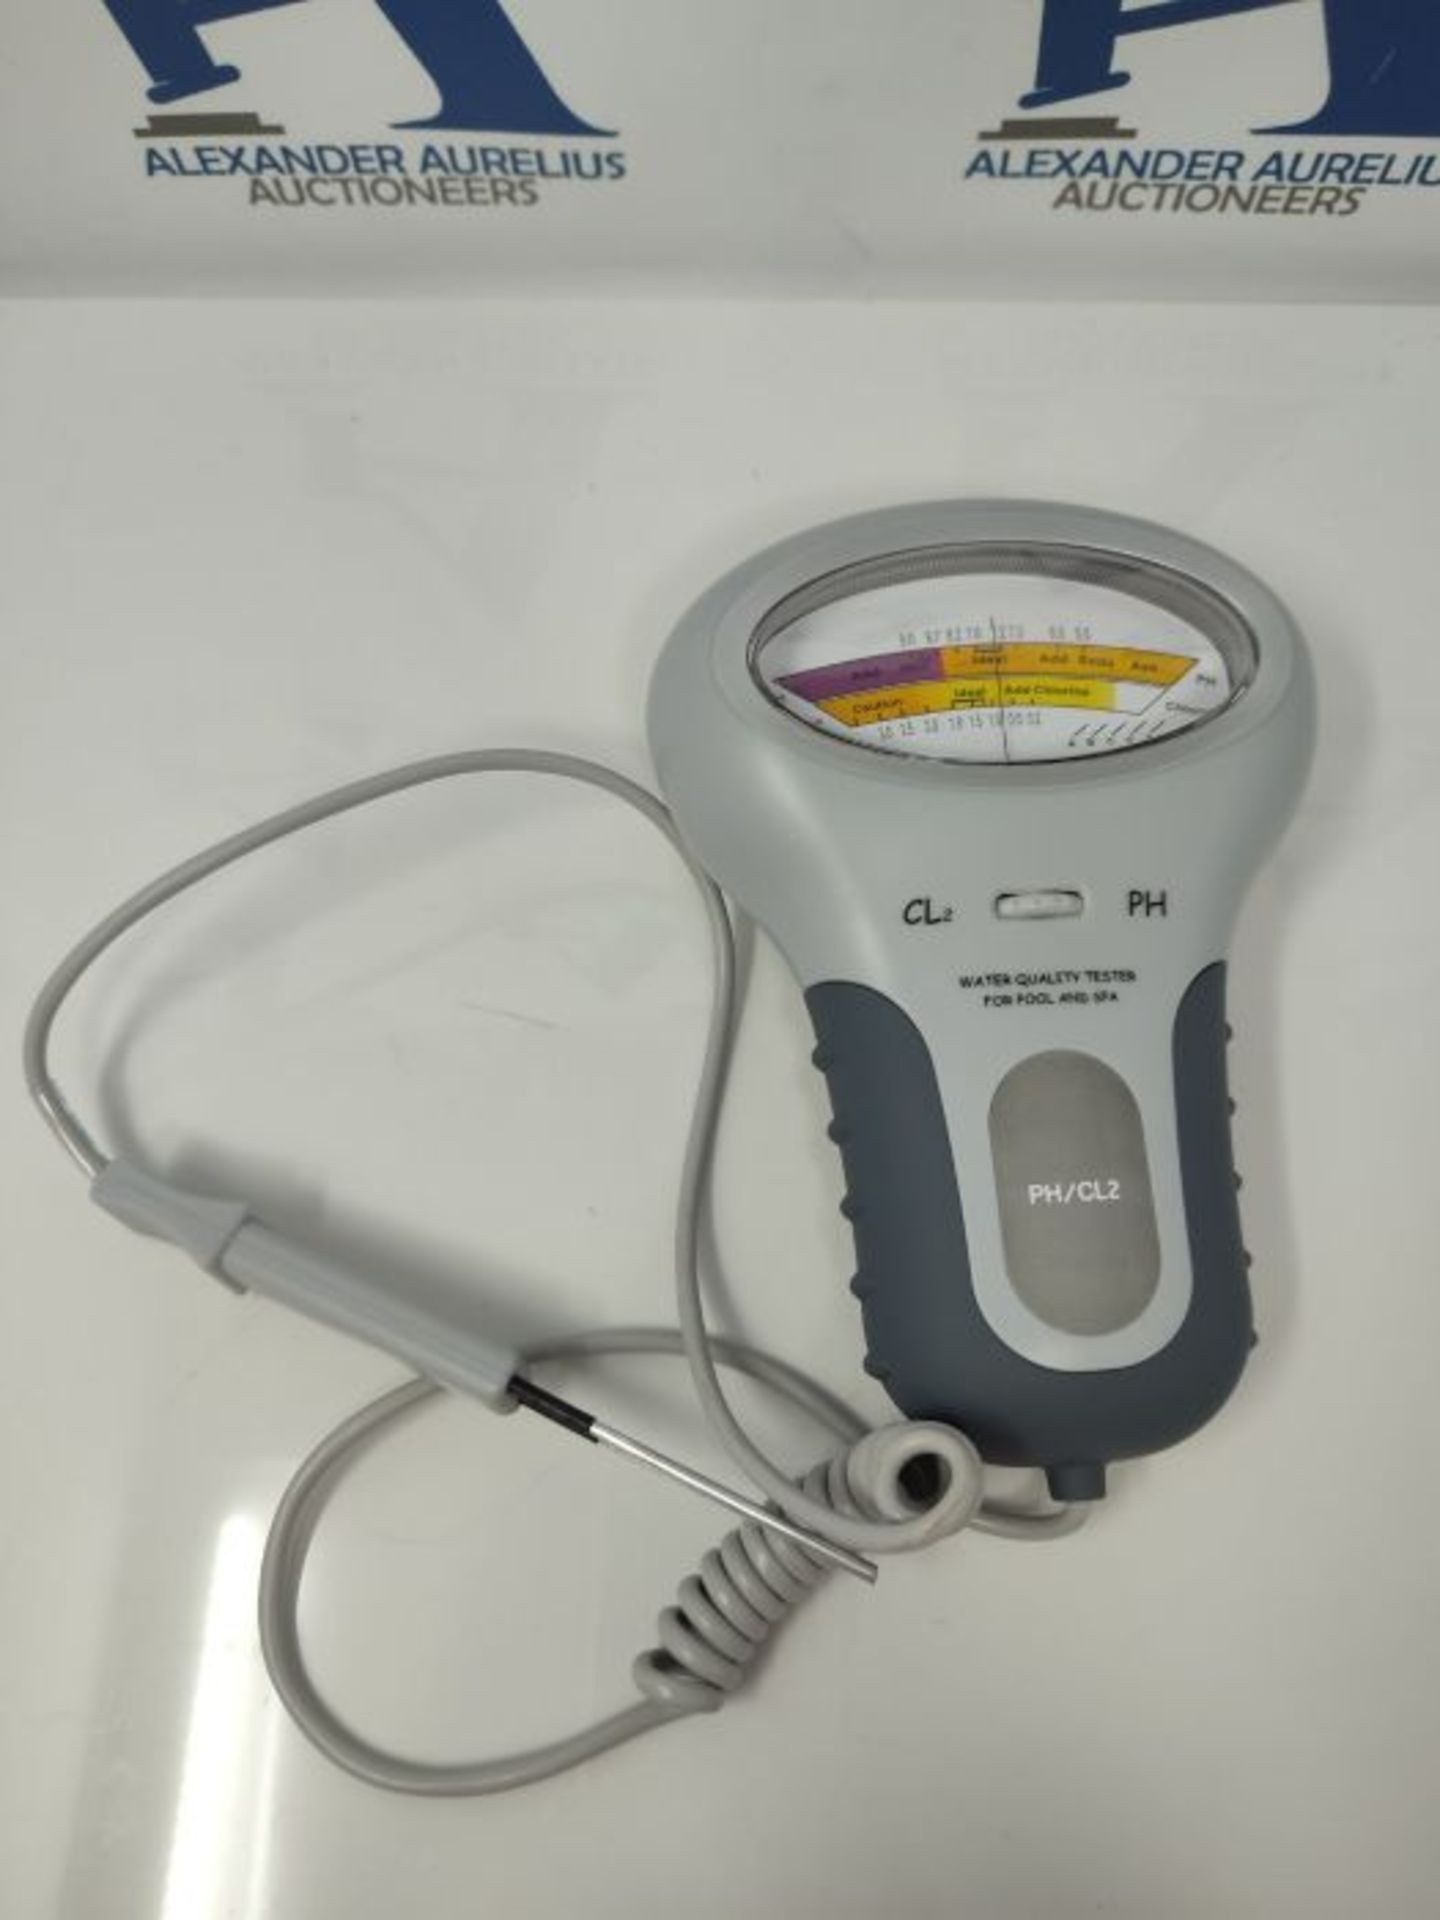 Diyeeni Portable 2 in 1 Chlorine and PH Tester, Swimming Pool Spa Water Quality Monito - Image 2 of 2